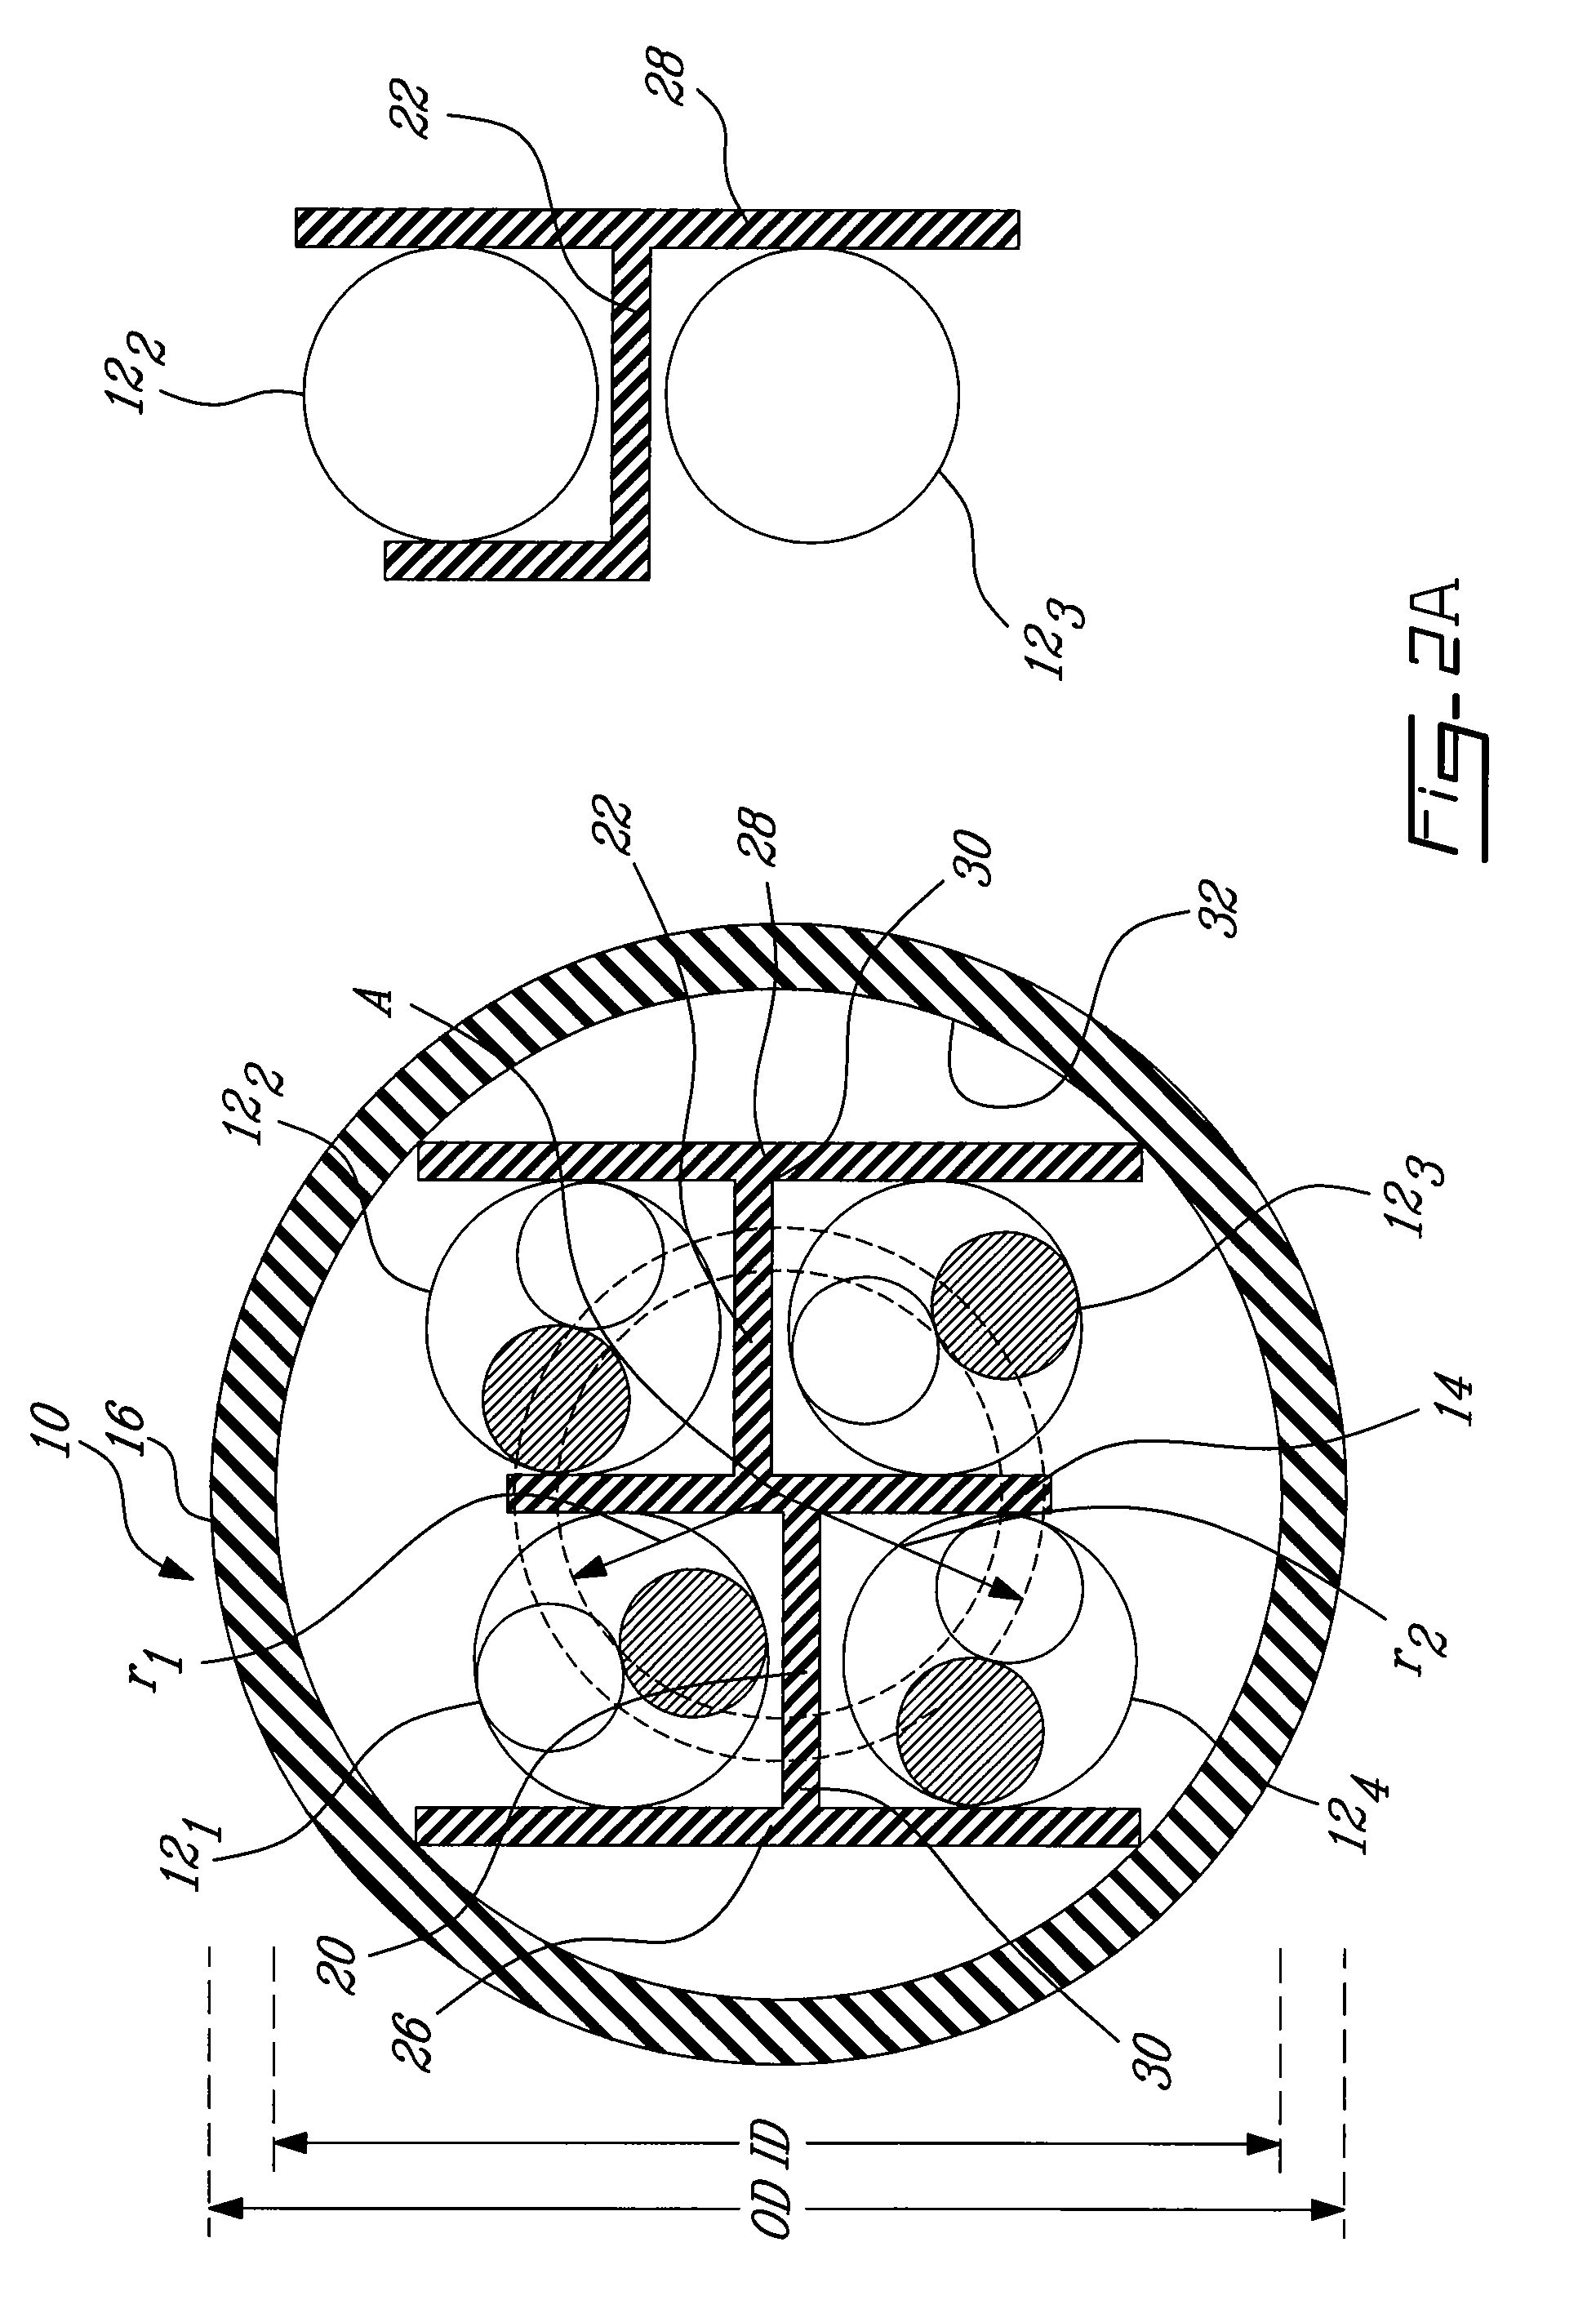 Web for separating conductors in a communication cable